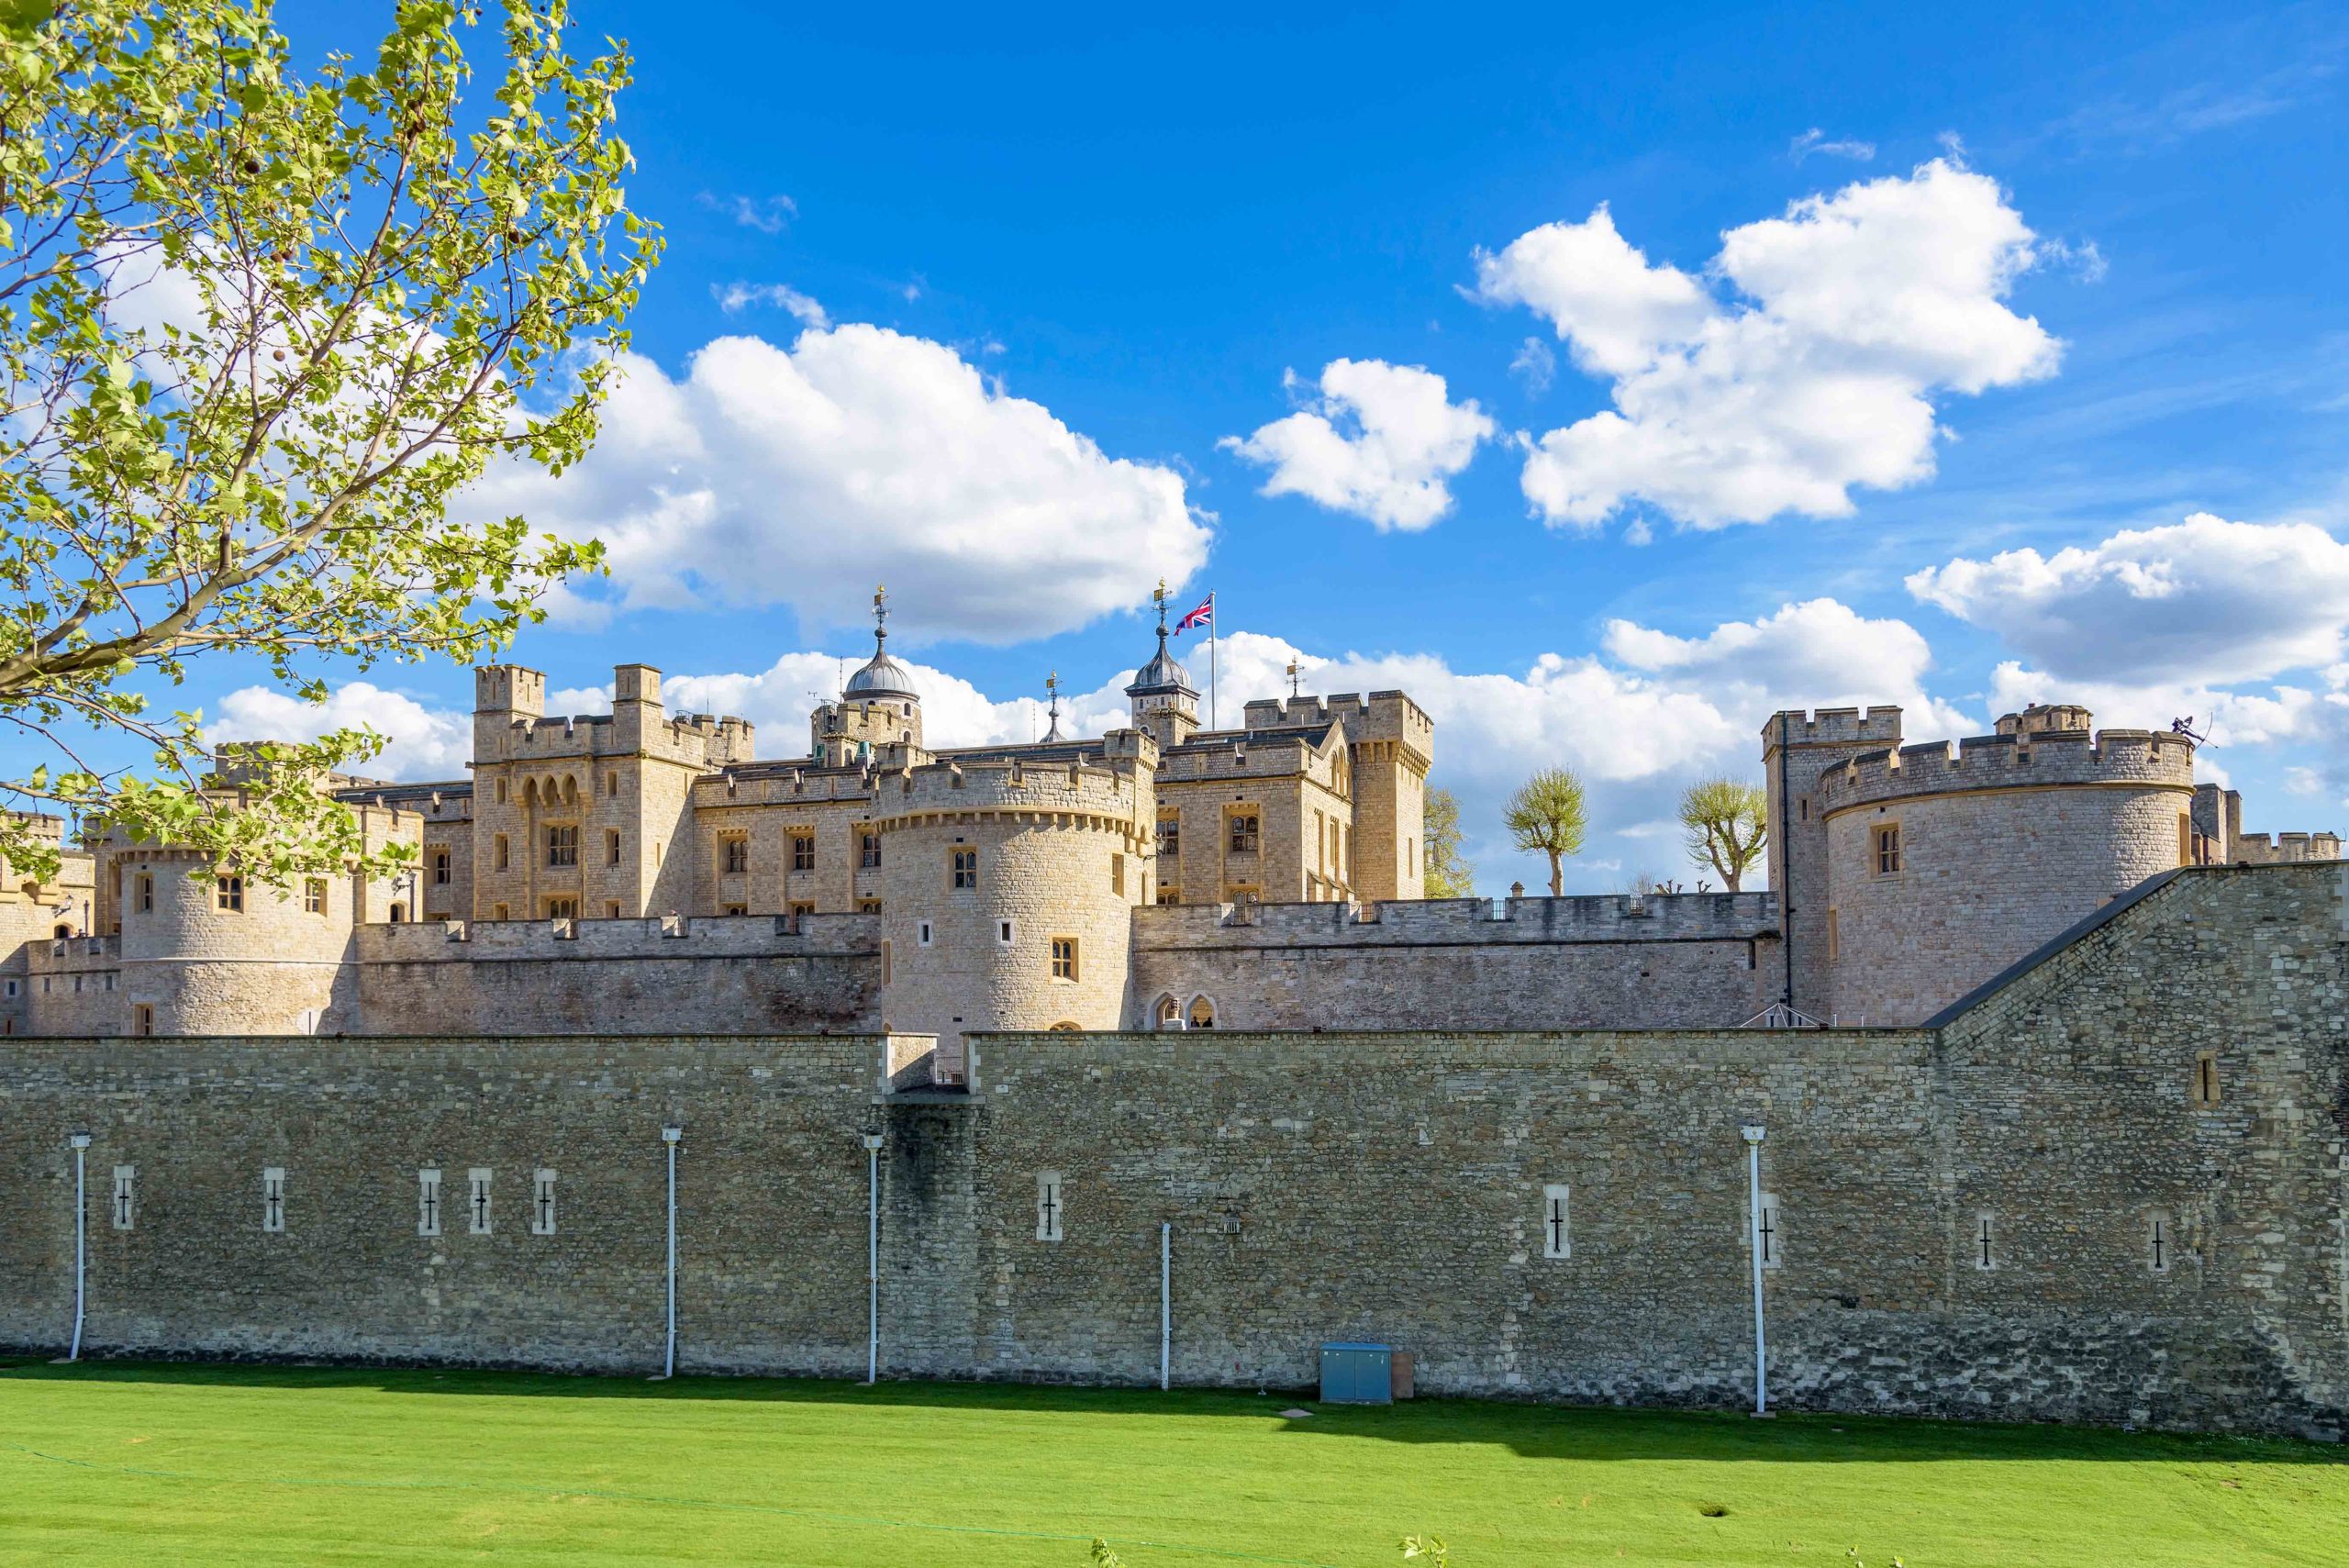 Châteaux anglais - Tower of London by mkos83 via Envato Elements